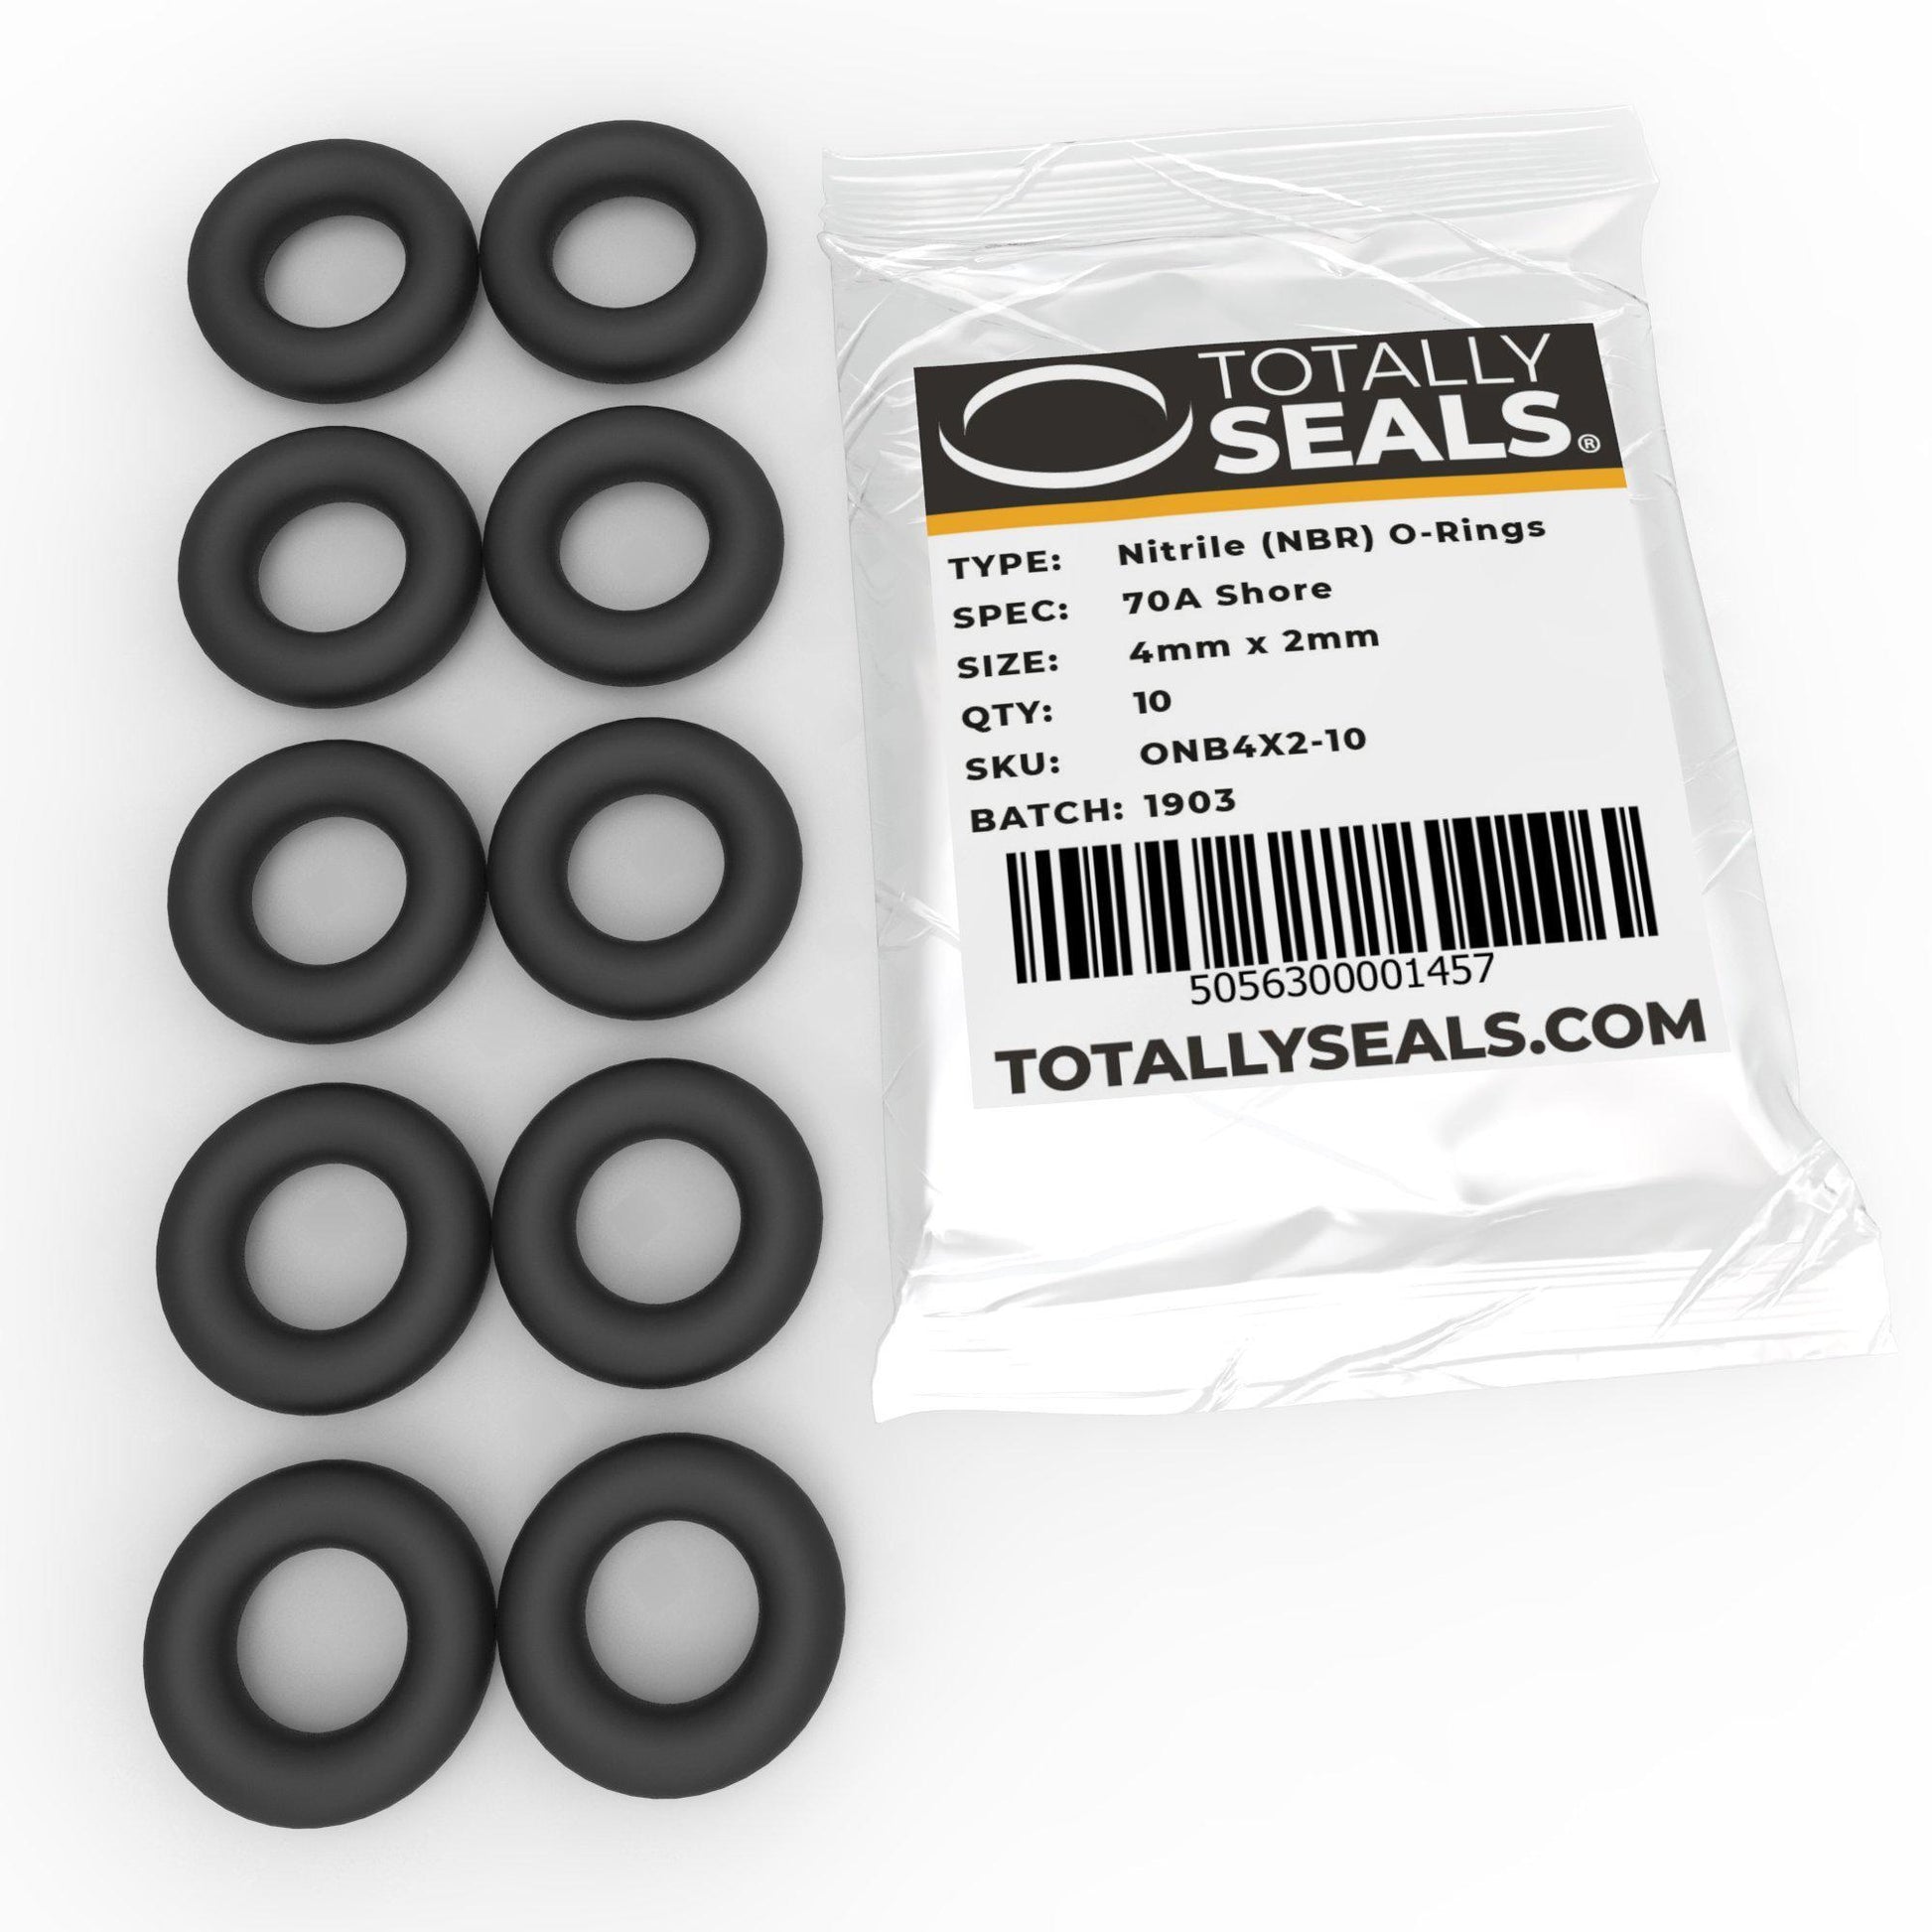 4mm x 2mm (8mm OD) Nitrile O-Rings - Totally Seals®